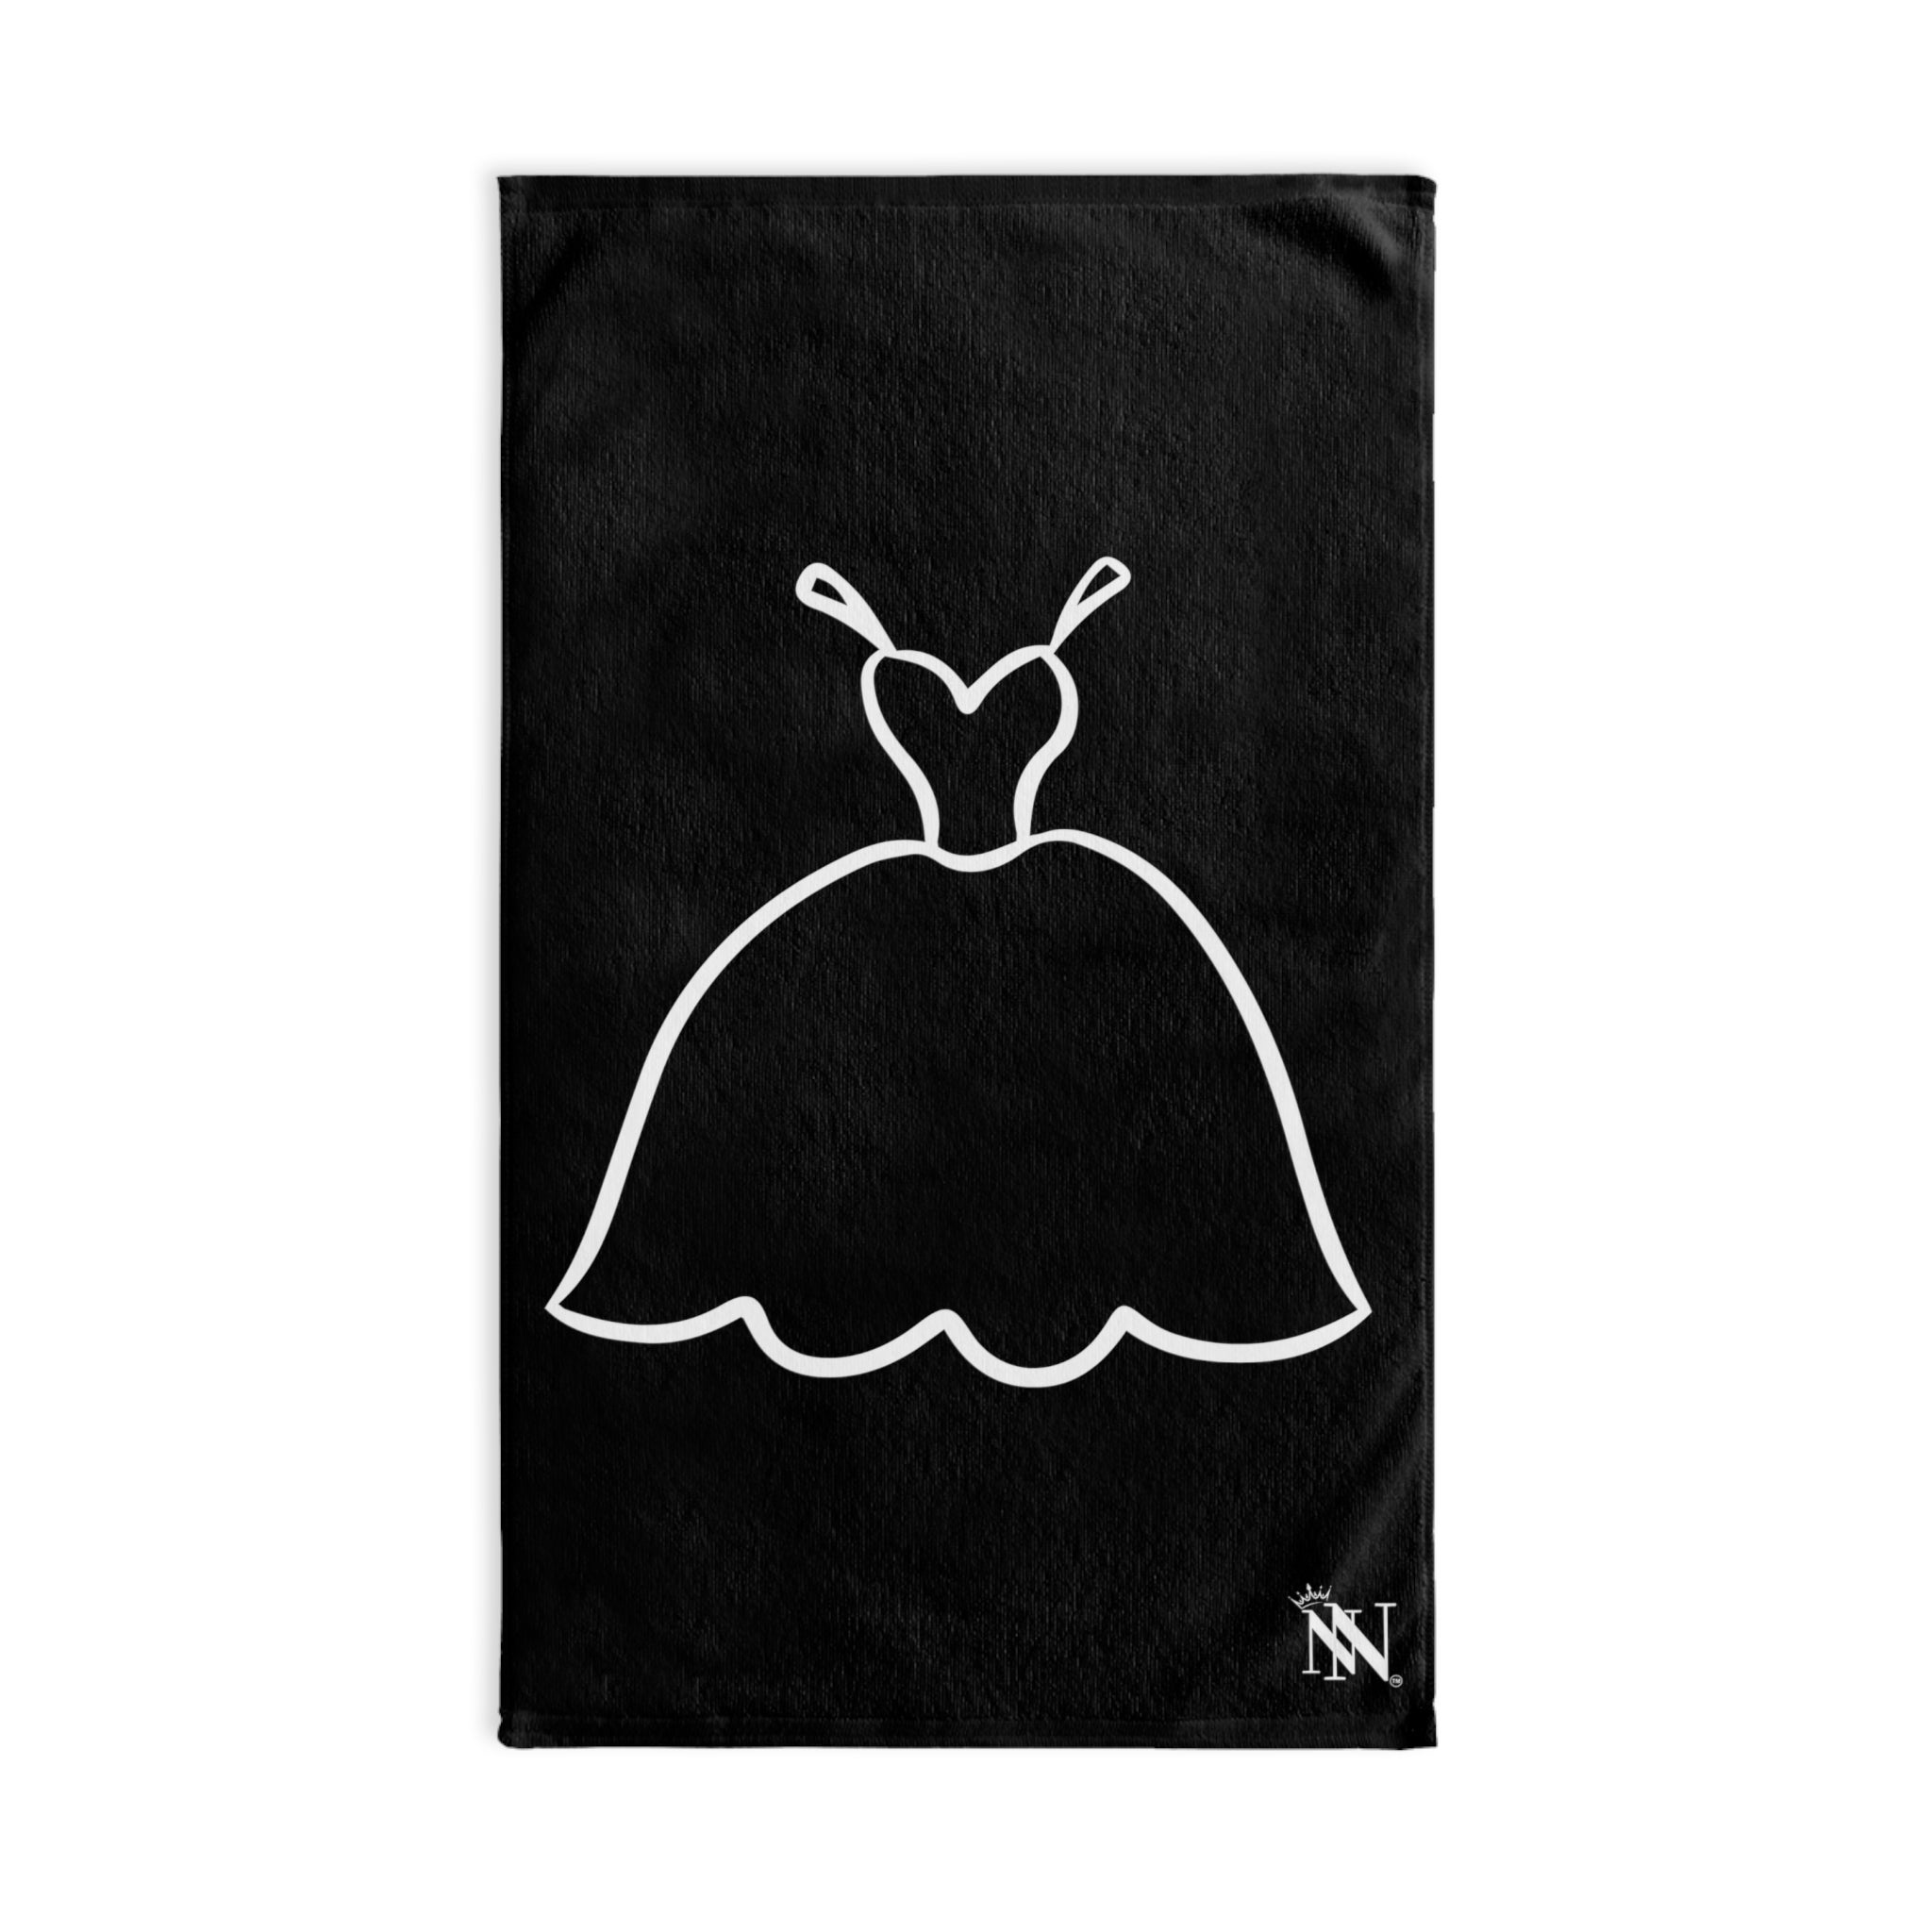 Bridal Gown Black | Sexy Gifts for Boyfriend, Funny Towel Romantic Gift for Wedding Couple Fiance First Year 2nd Anniversary Valentines, Party Gag Gifts, Joke Humor Cloth for Husband Men BF NECTAR NAPKINS